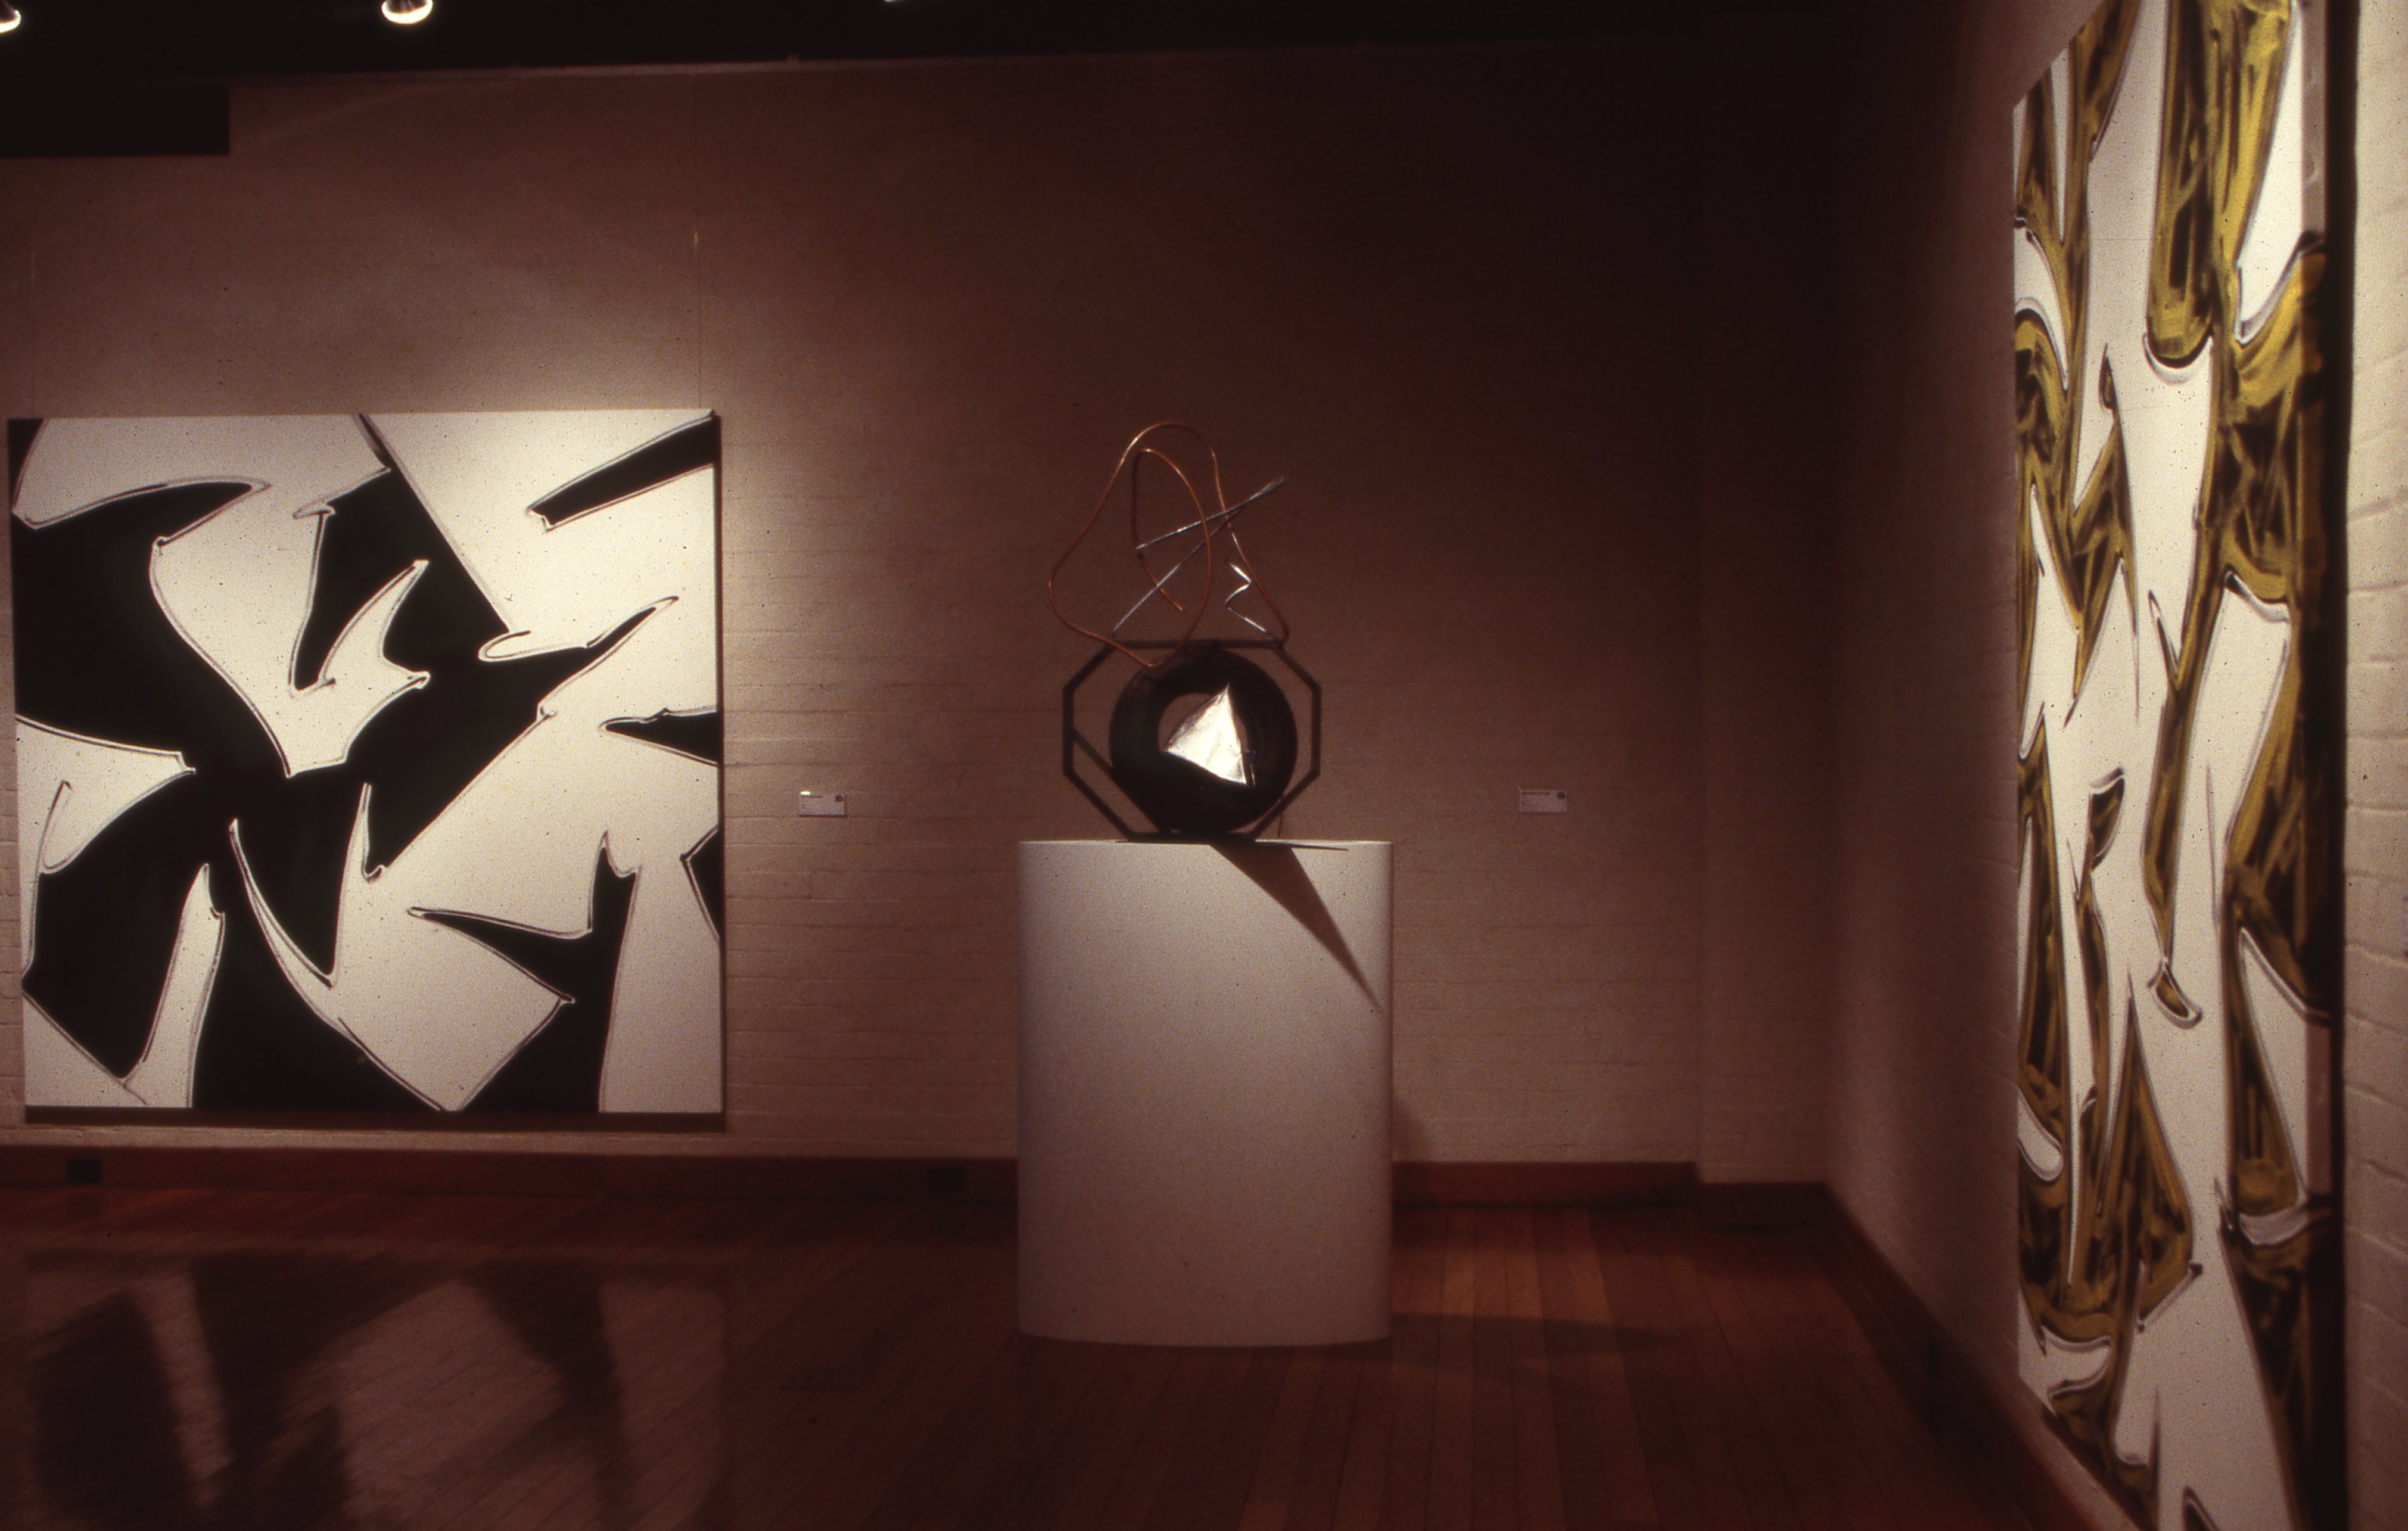 idg_archive_1988_from_the_southern_cross_a_view_of_the_world_art_c._1940-1988_the_australian_biennale_002_install.jpg